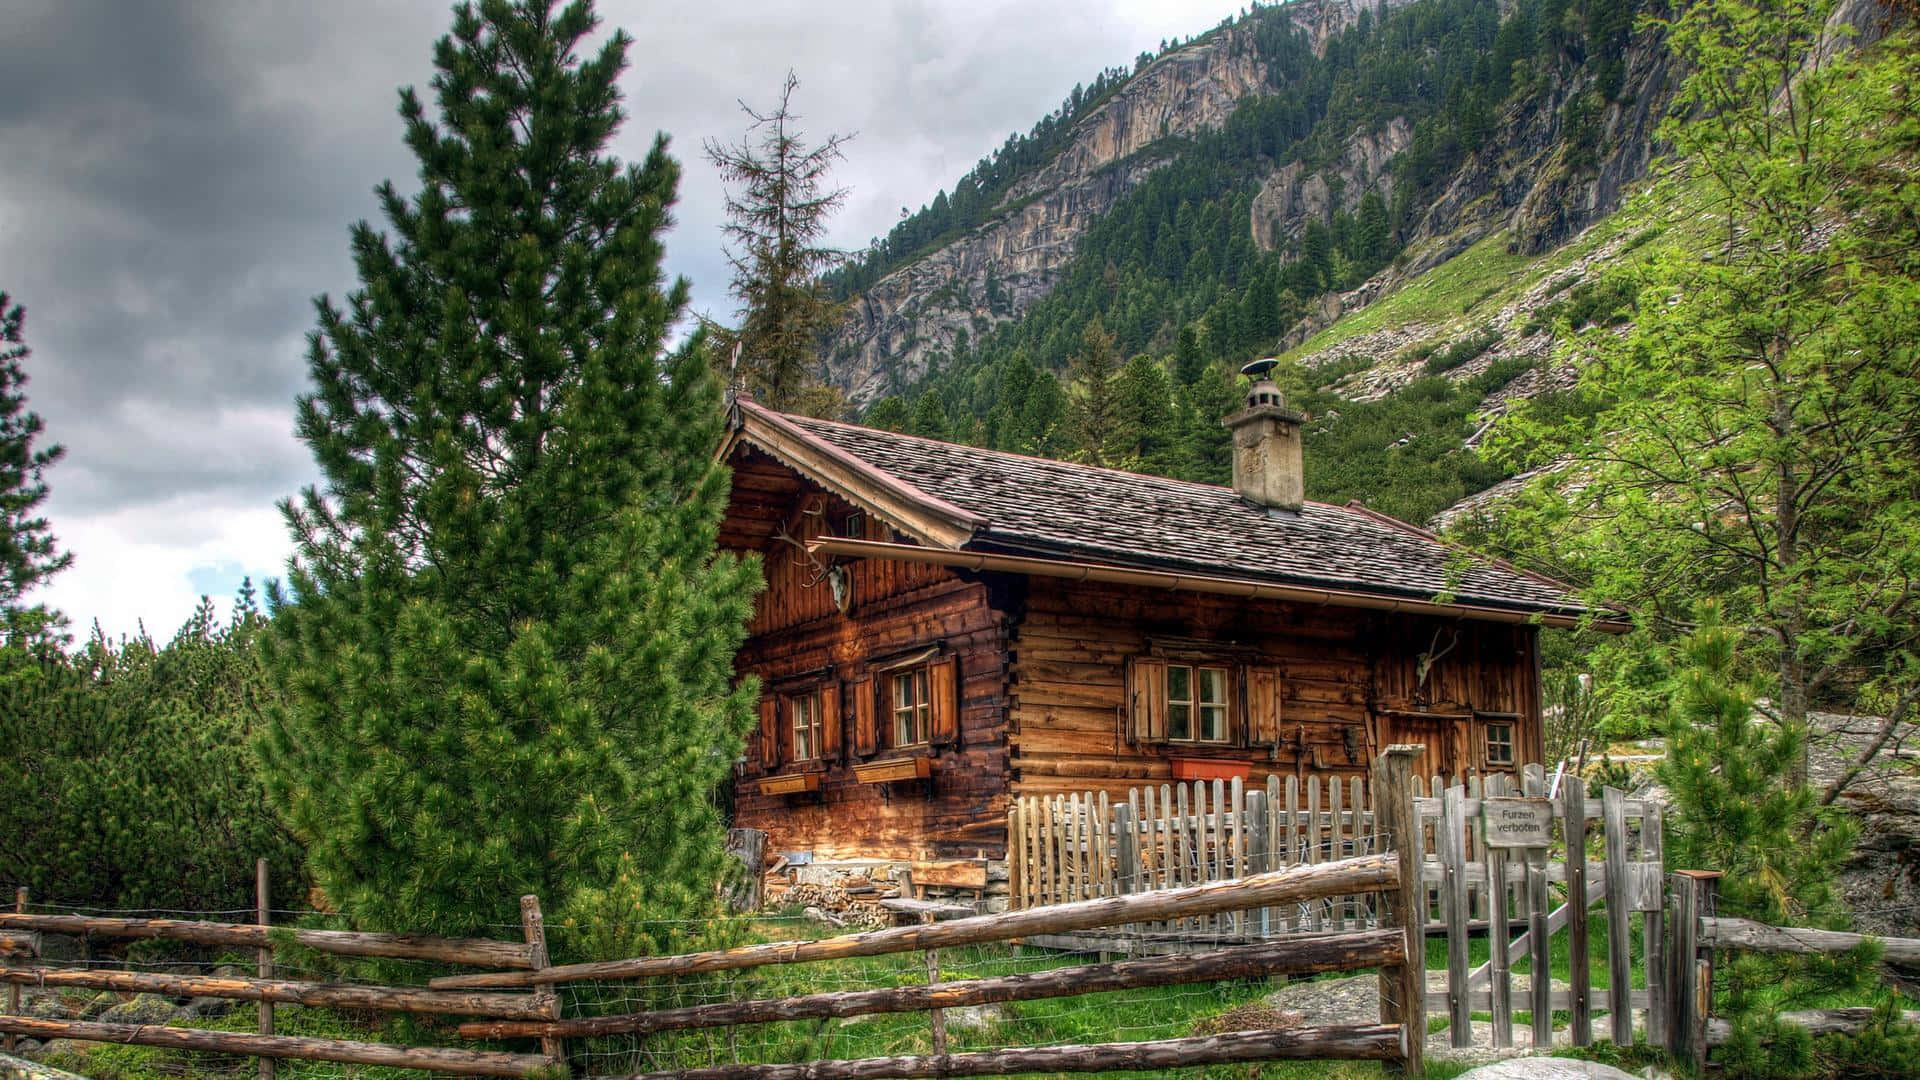 Wooden Log Cabin In Nature Background